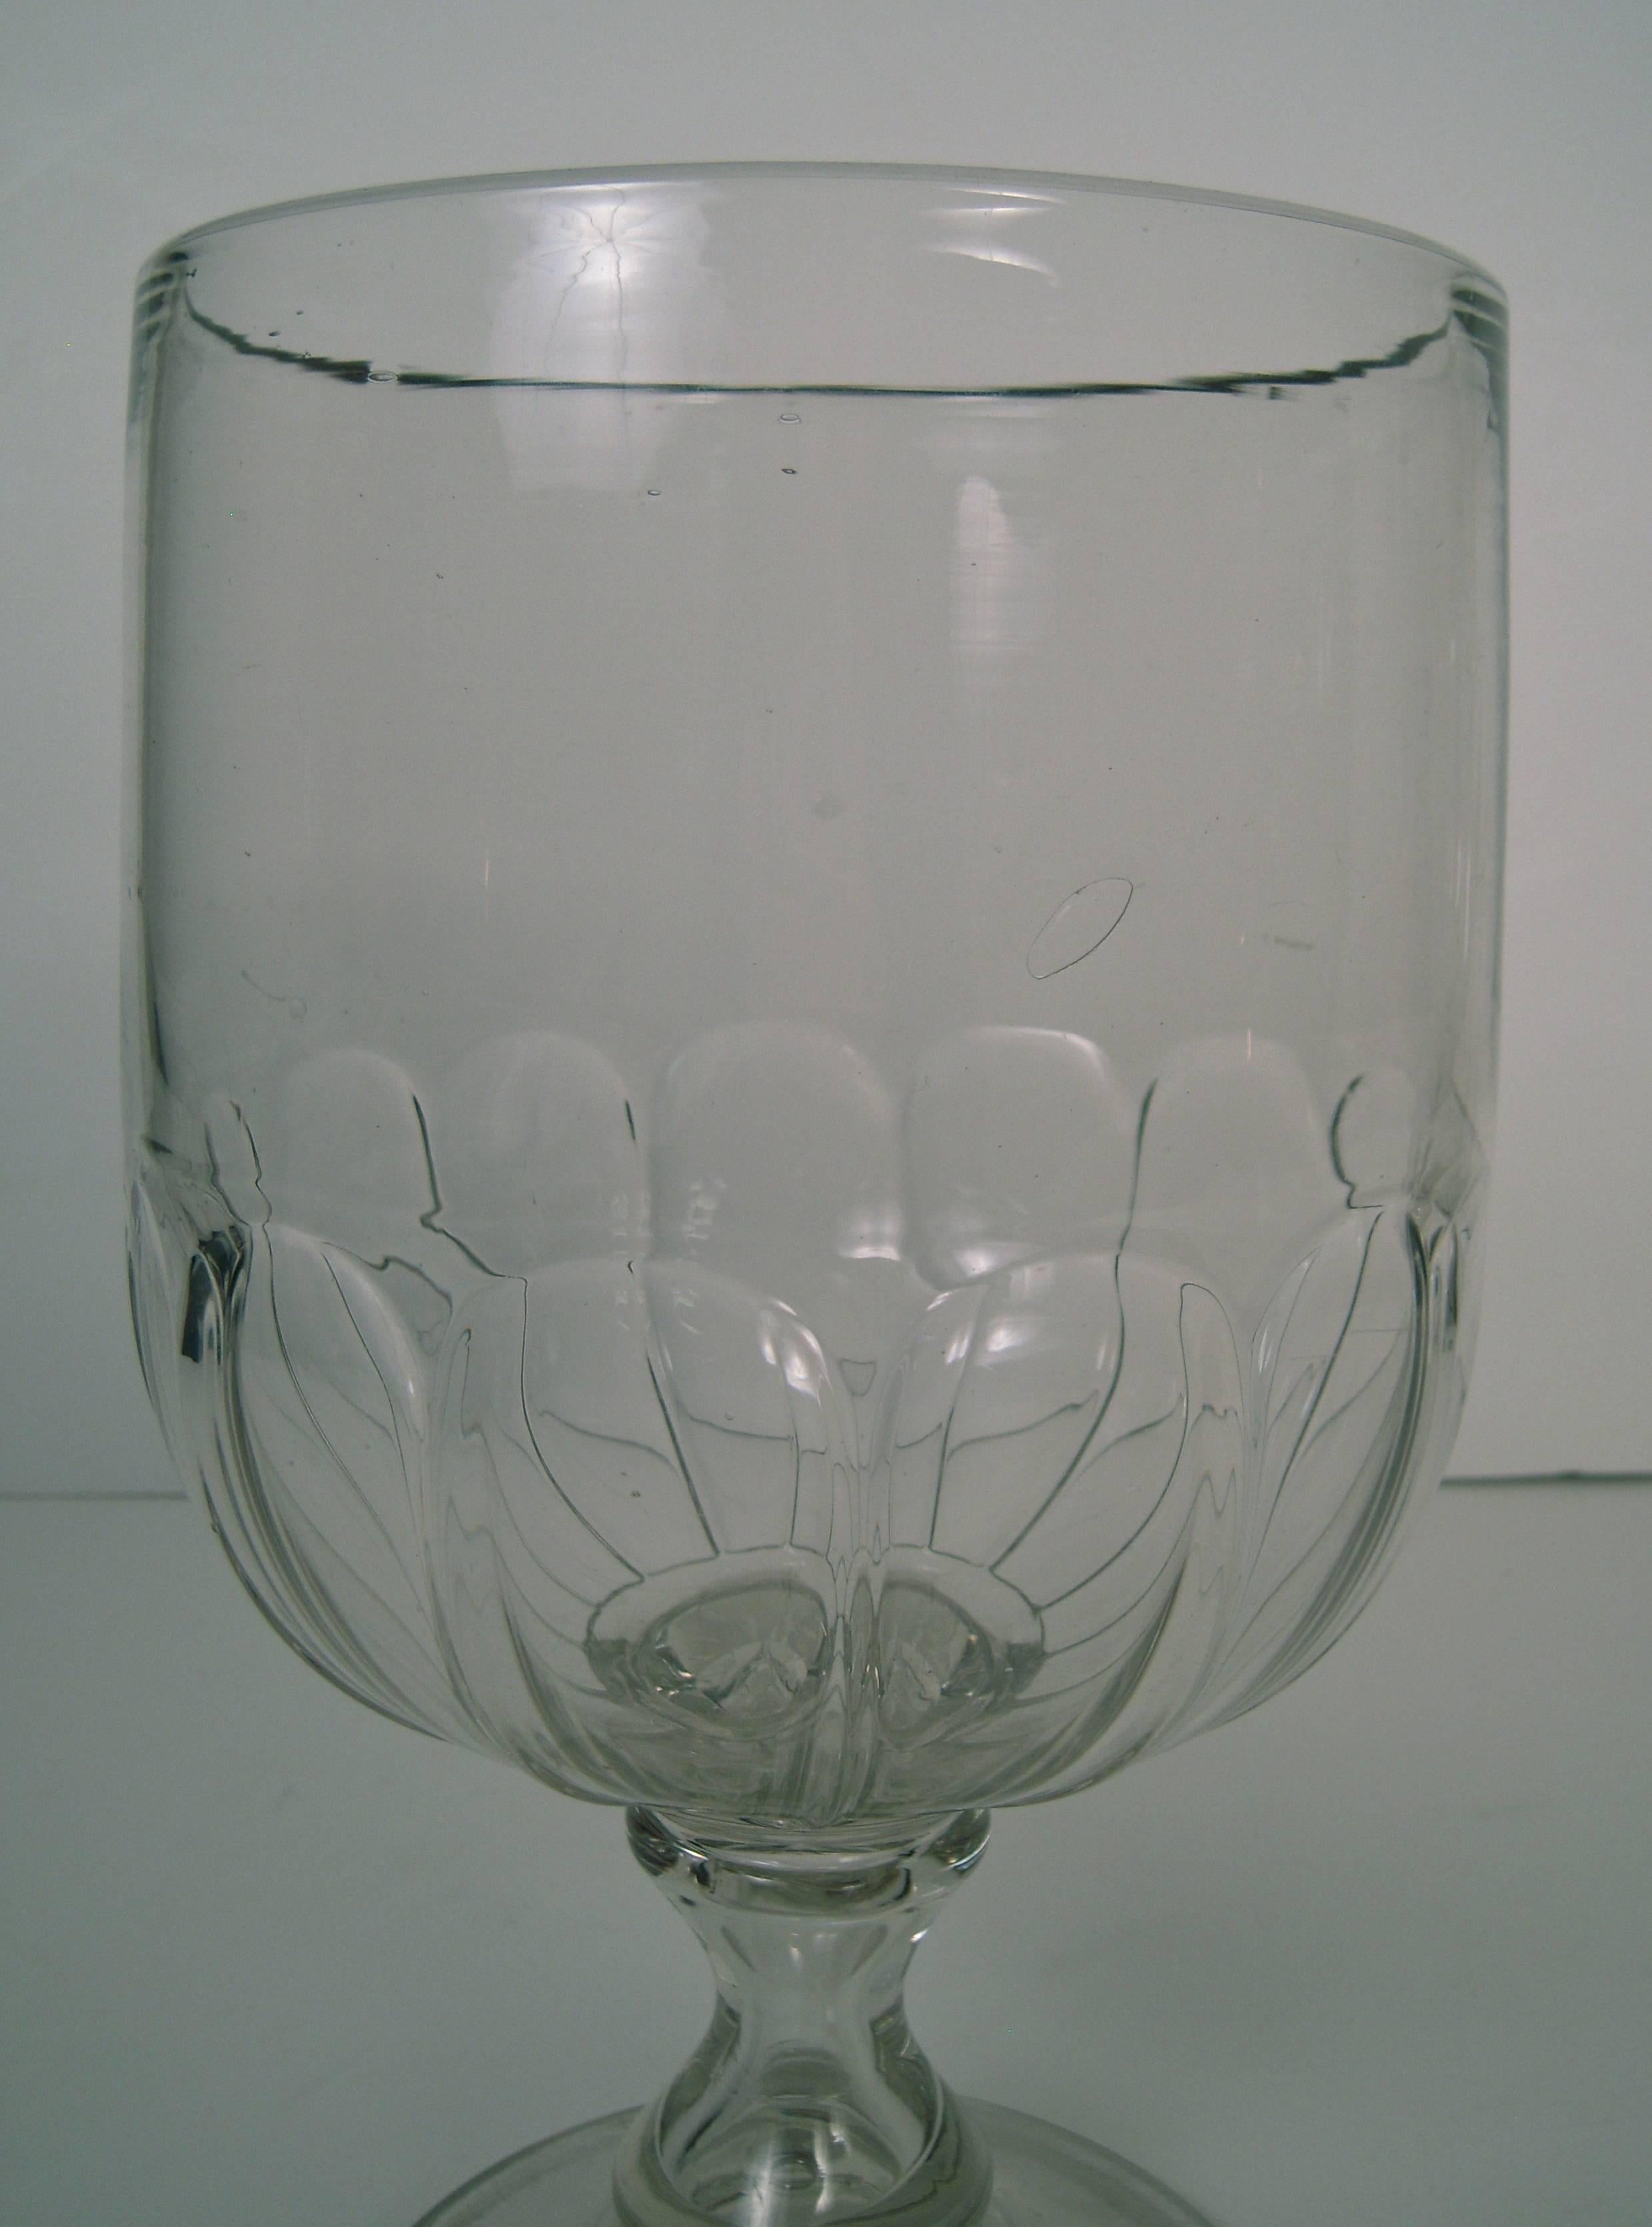 North American Large Blown Glass Vase or Goblet, circa 1830